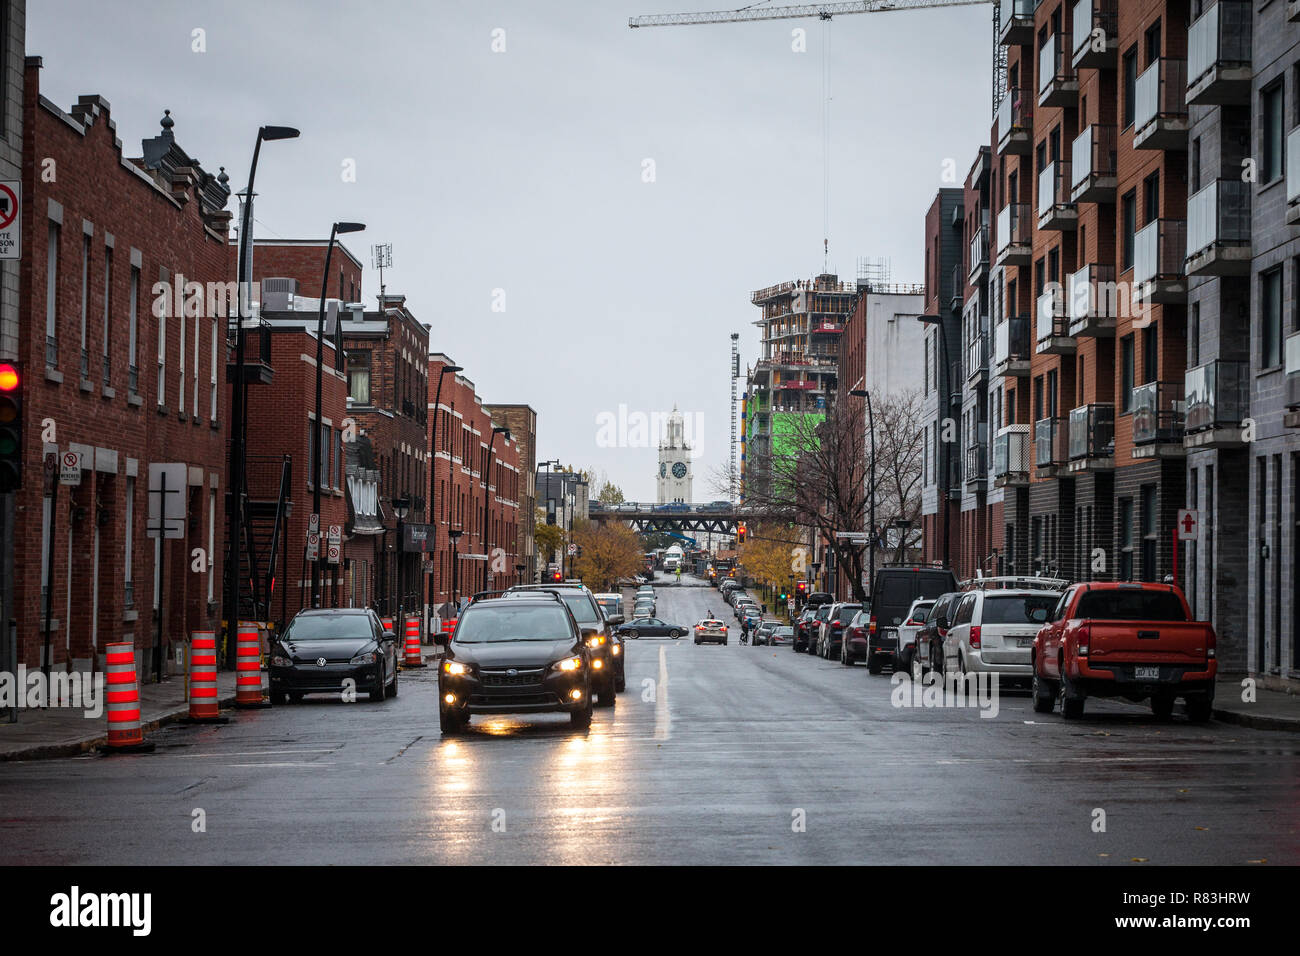 MONTREAL, CANADA - NOVEMBER 5, 2018: Typical residential North American street with typical red brick accomodation buildings & car traffic. Atwater Ma Stock Photo